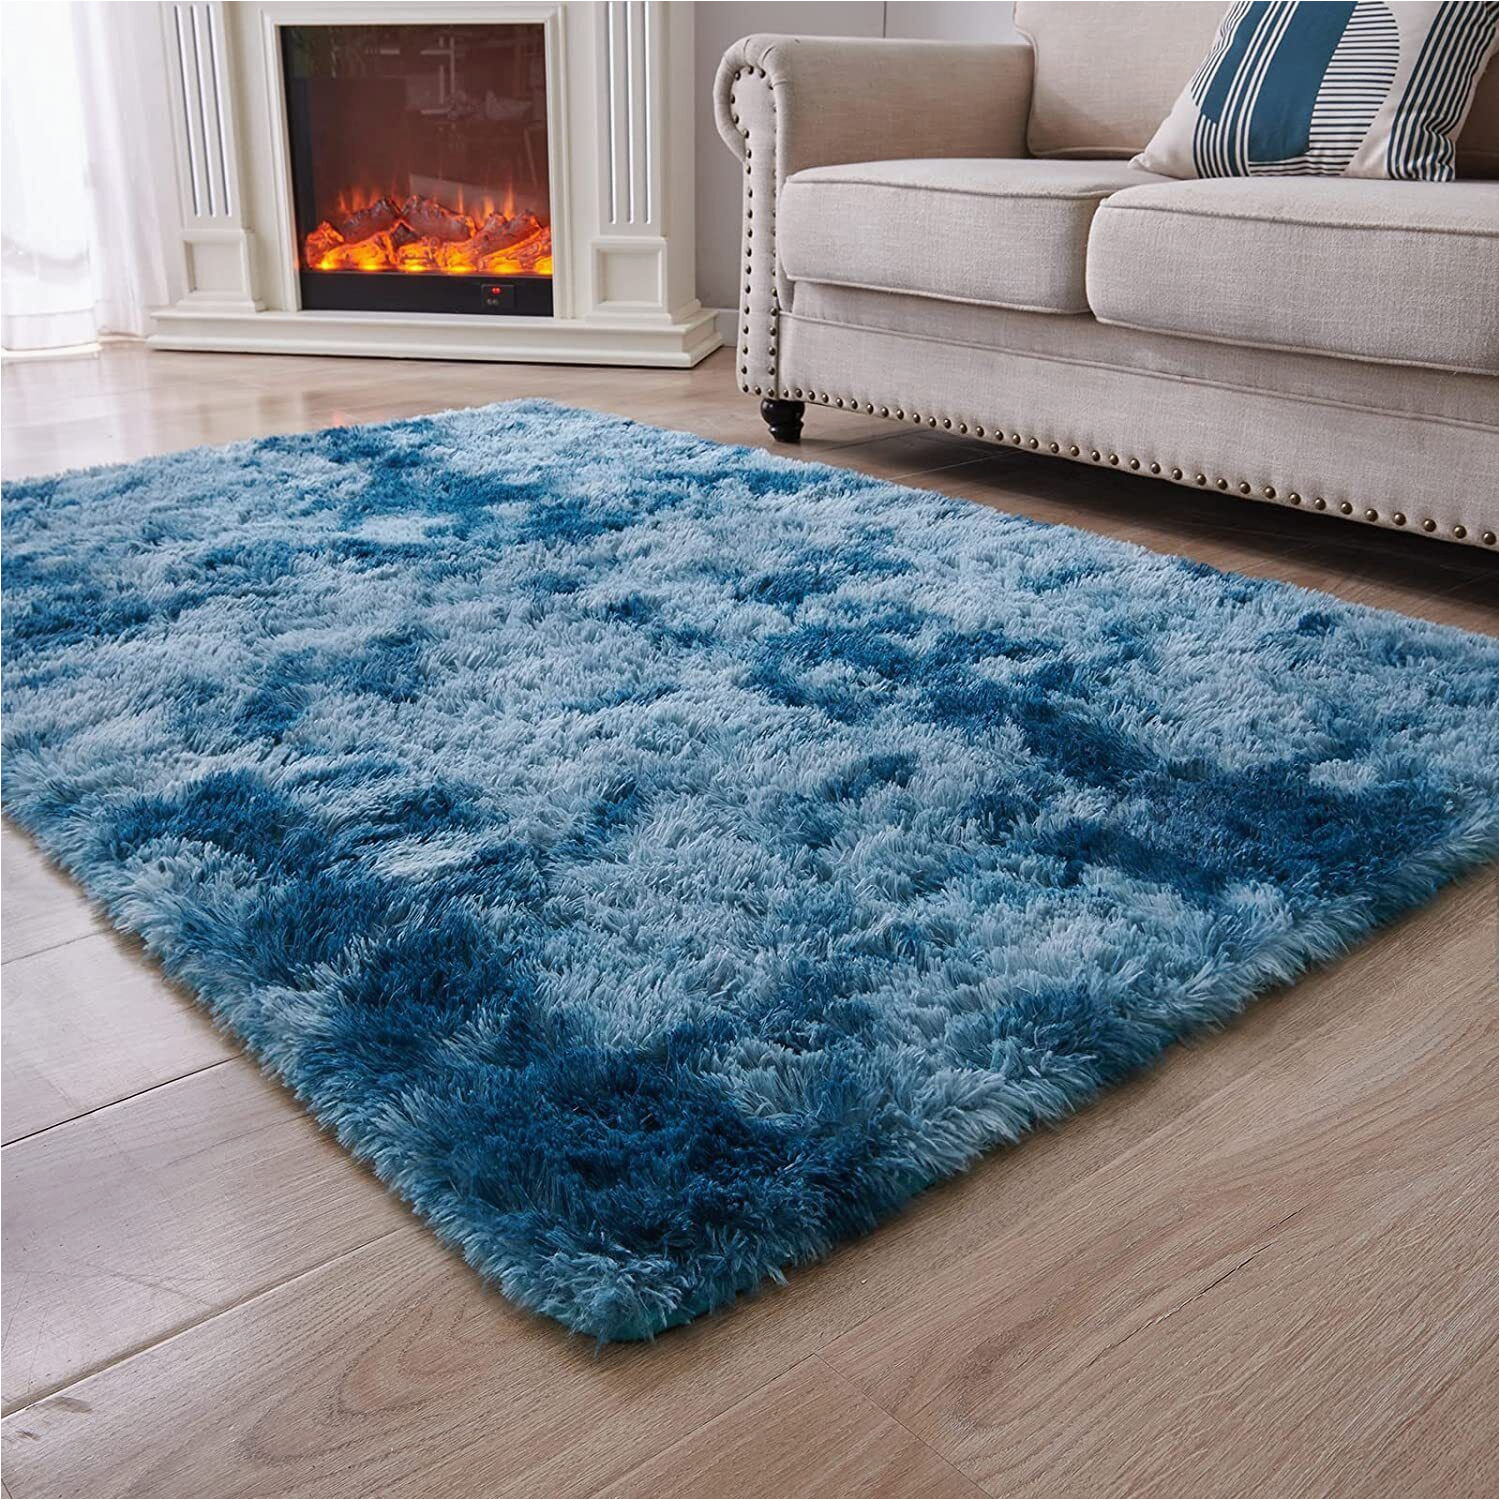 8 X 10 area Rug Clearance Blue Shag area Rug 8×10 Clearance for Living Room Large Modern Reduced Price New